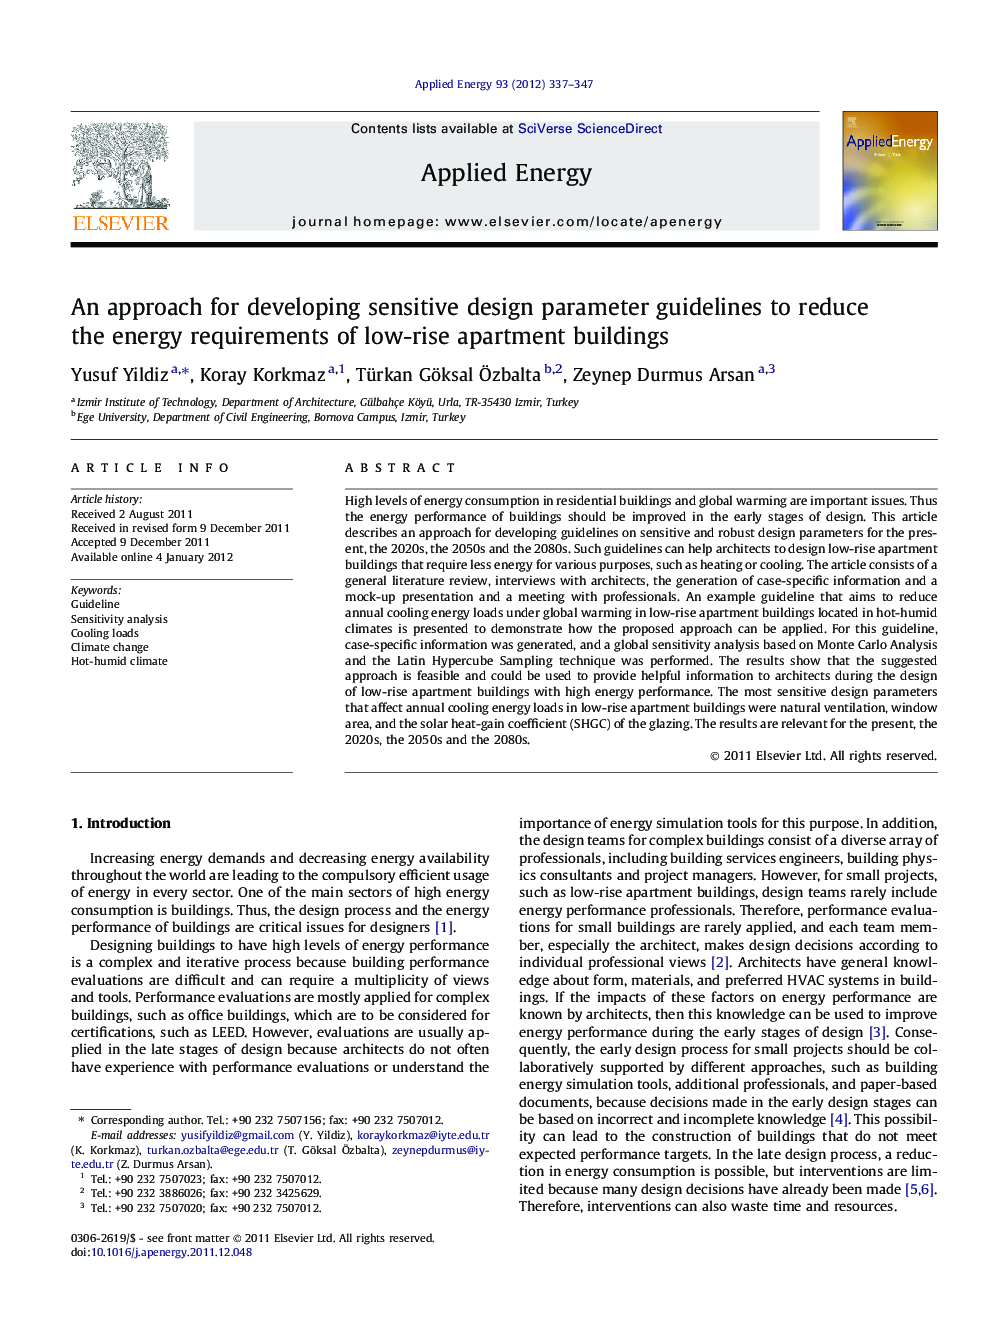 An approach for developing sensitive design parameter guidelines to reduce the energy requirements of low-rise apartment buildings